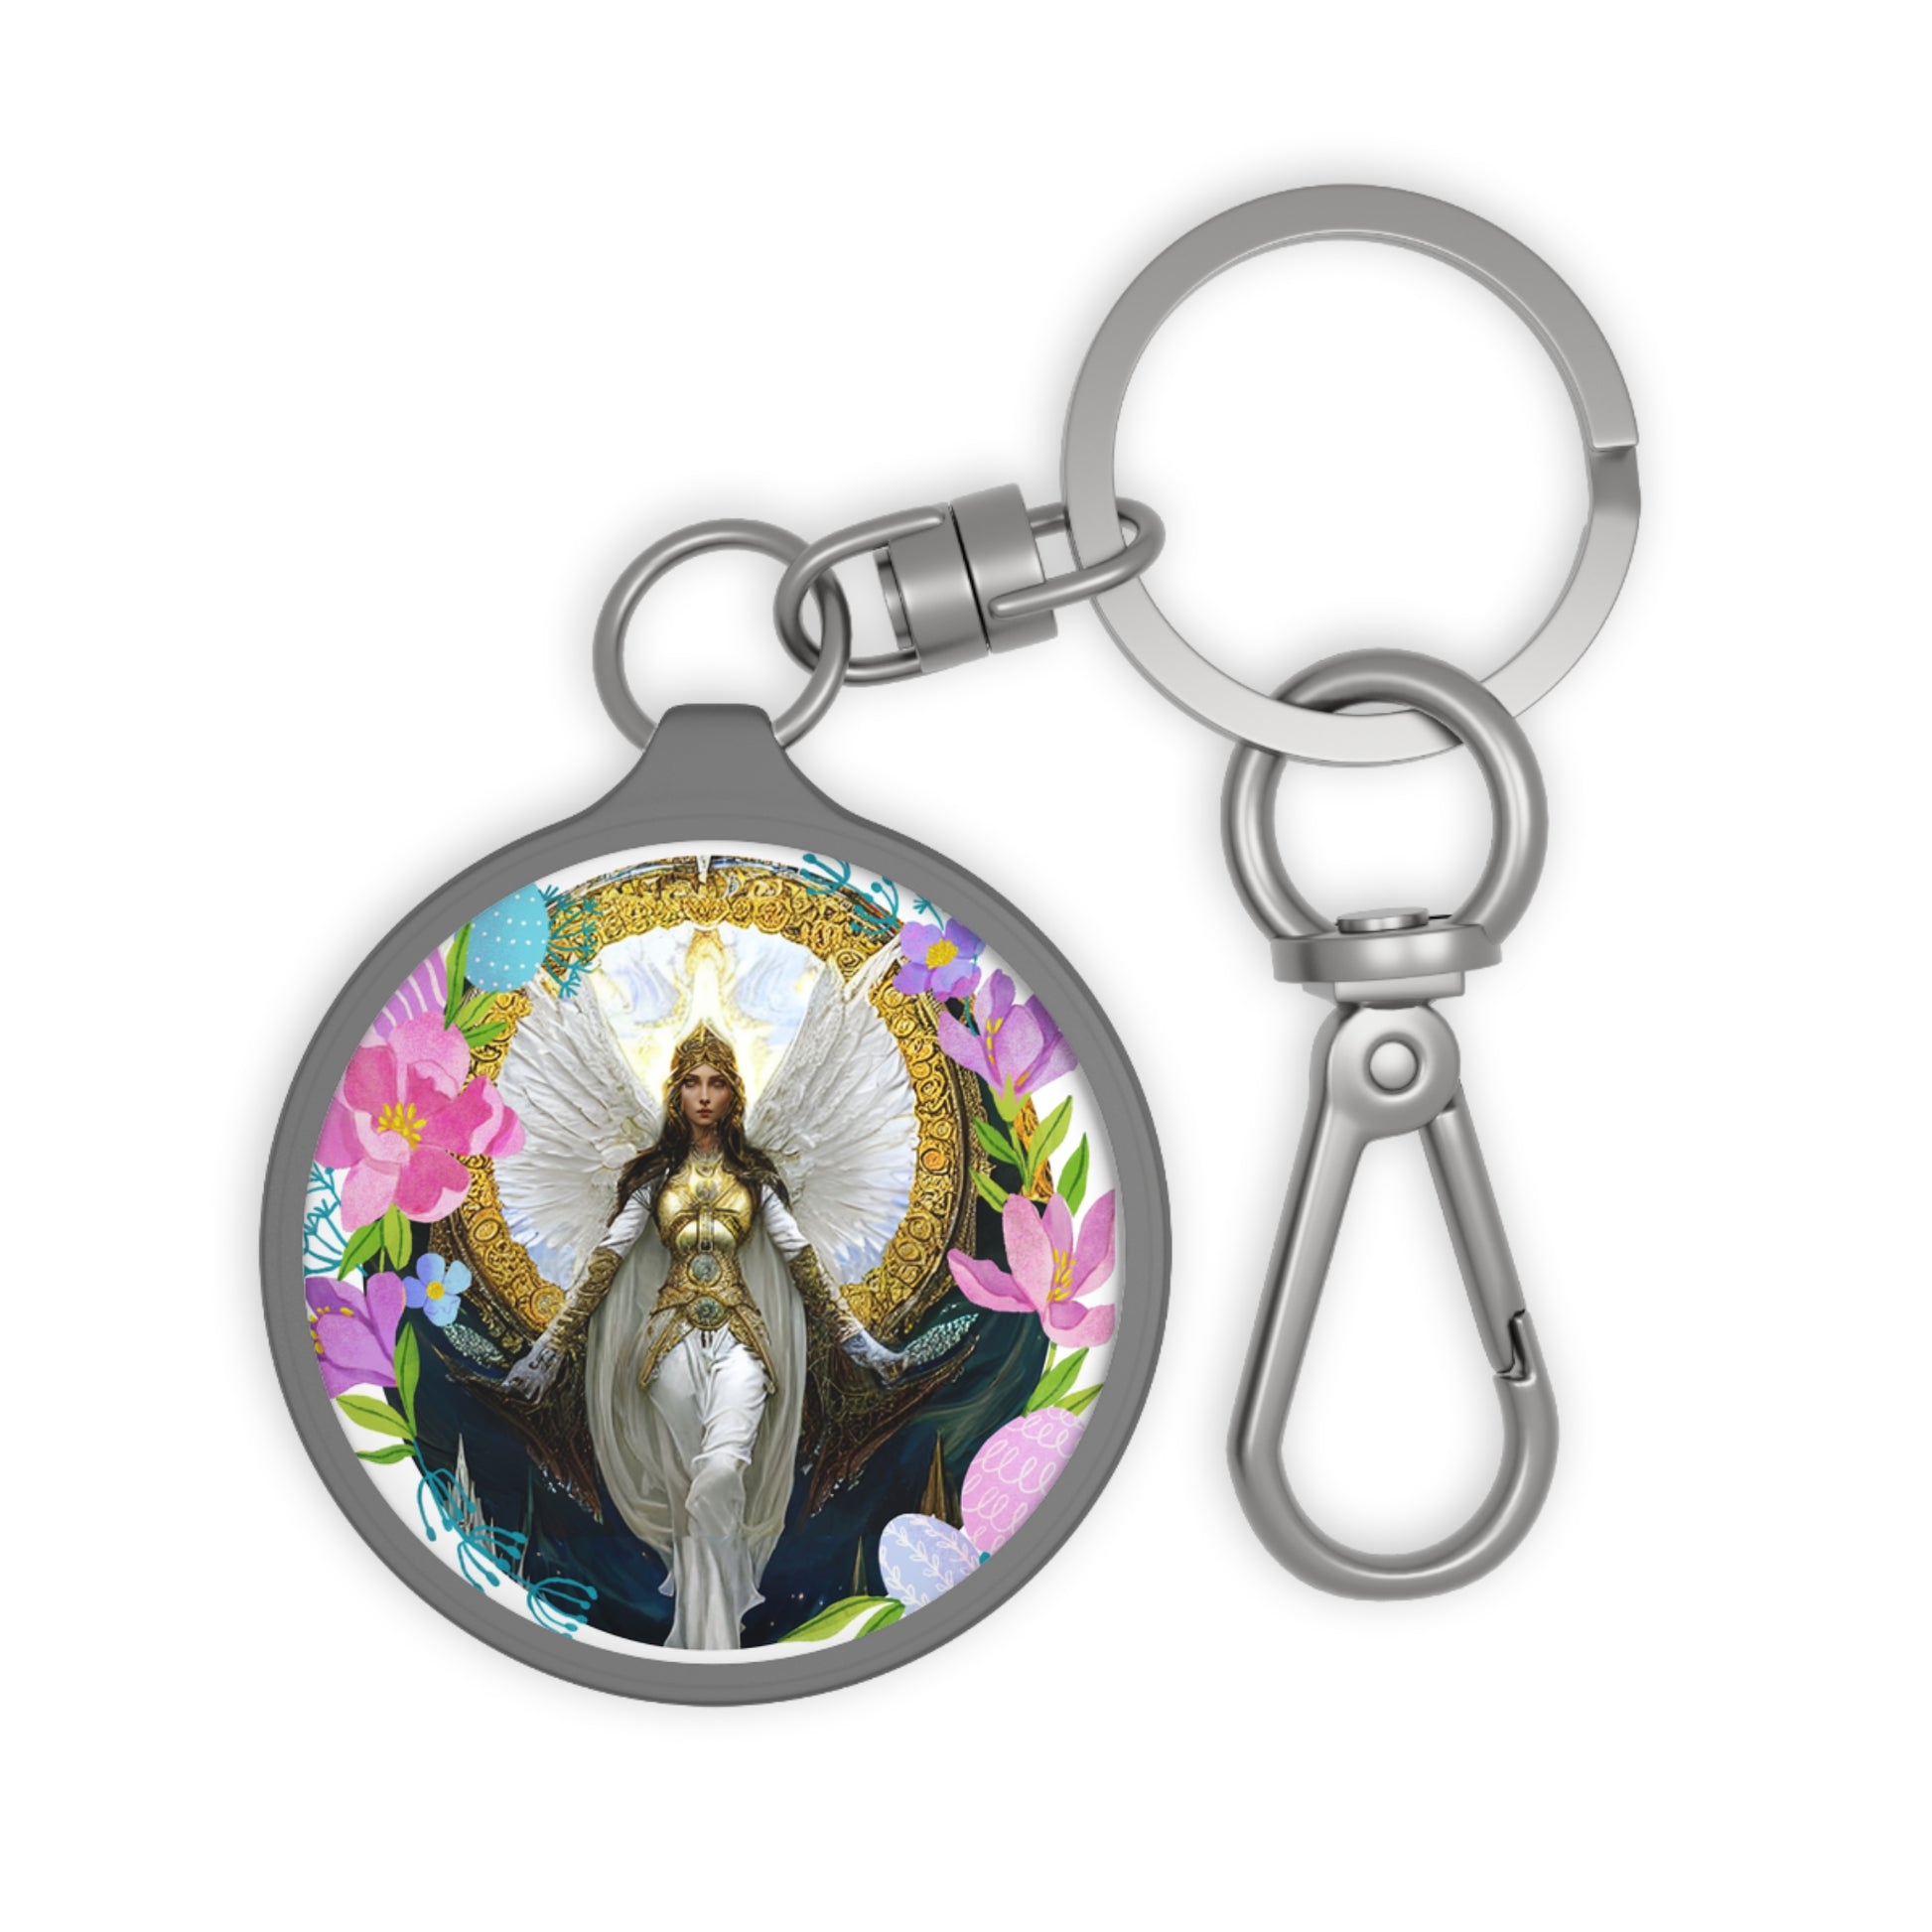 Guiding Light: Archangel Jophiel Keyring - Illuminate Your Journey - Angelic Thrones: Your Gateway to the Angelic Realms